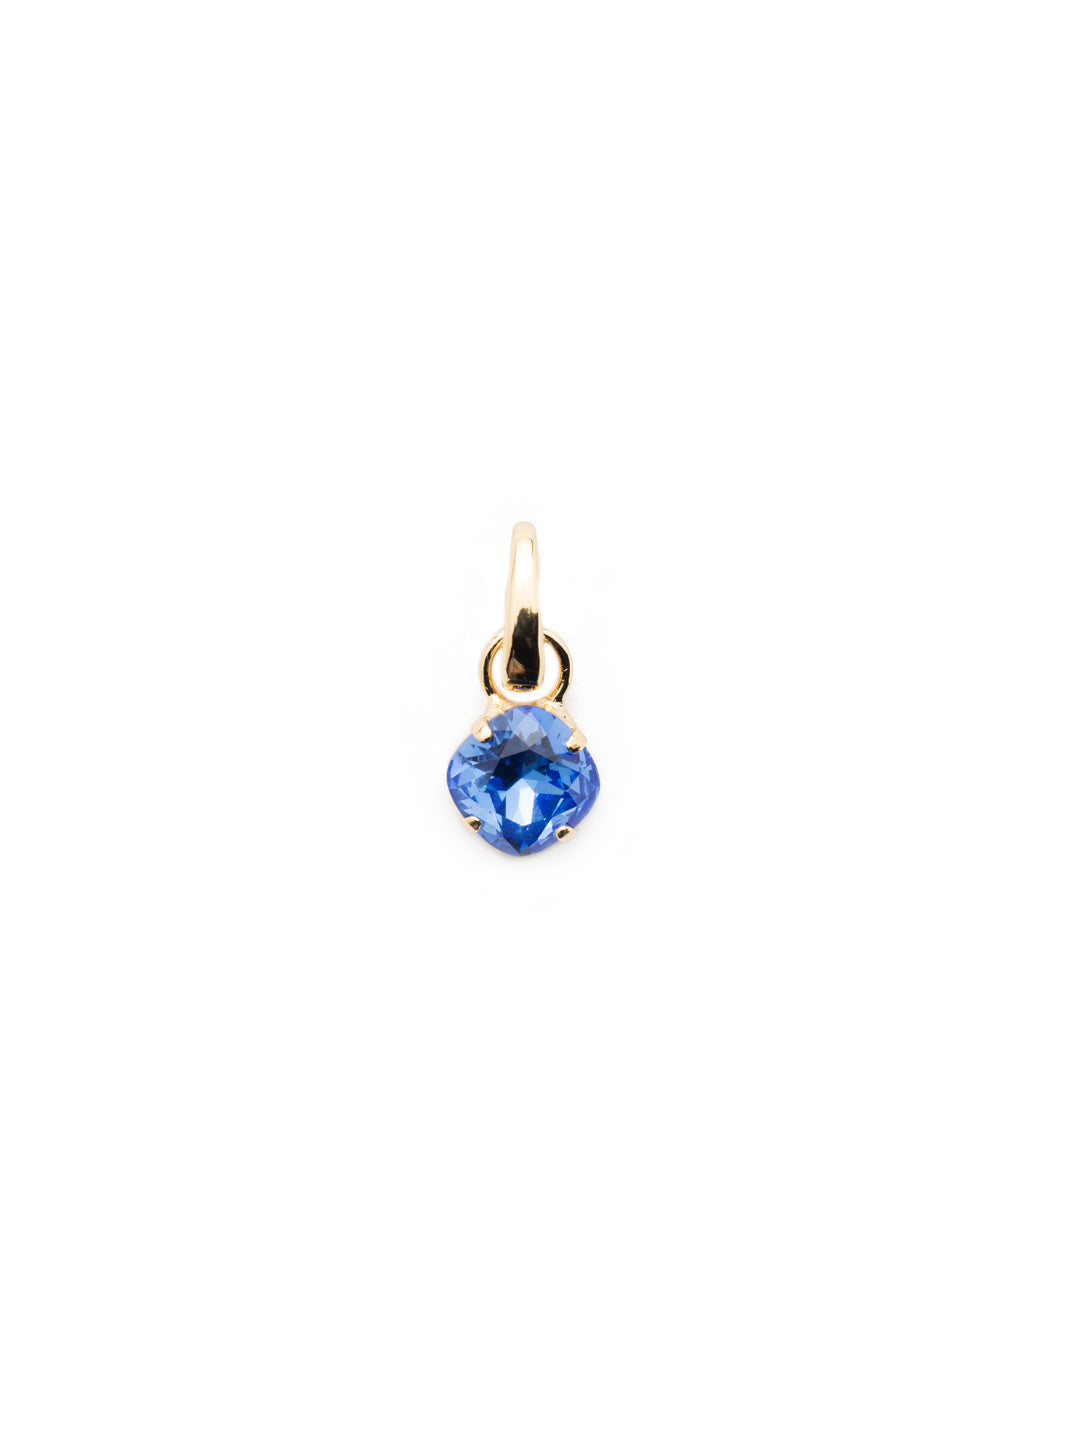 September Birthstone Sapphire Charm - CEU1BGSAP - <p>A cushion-cut crystal designed in your beautiful birthstone. Simply attach it to our favorite chain for an everyday look. From Sorrelli's Sapphire collection in our Bright Gold-tone finish.</p>